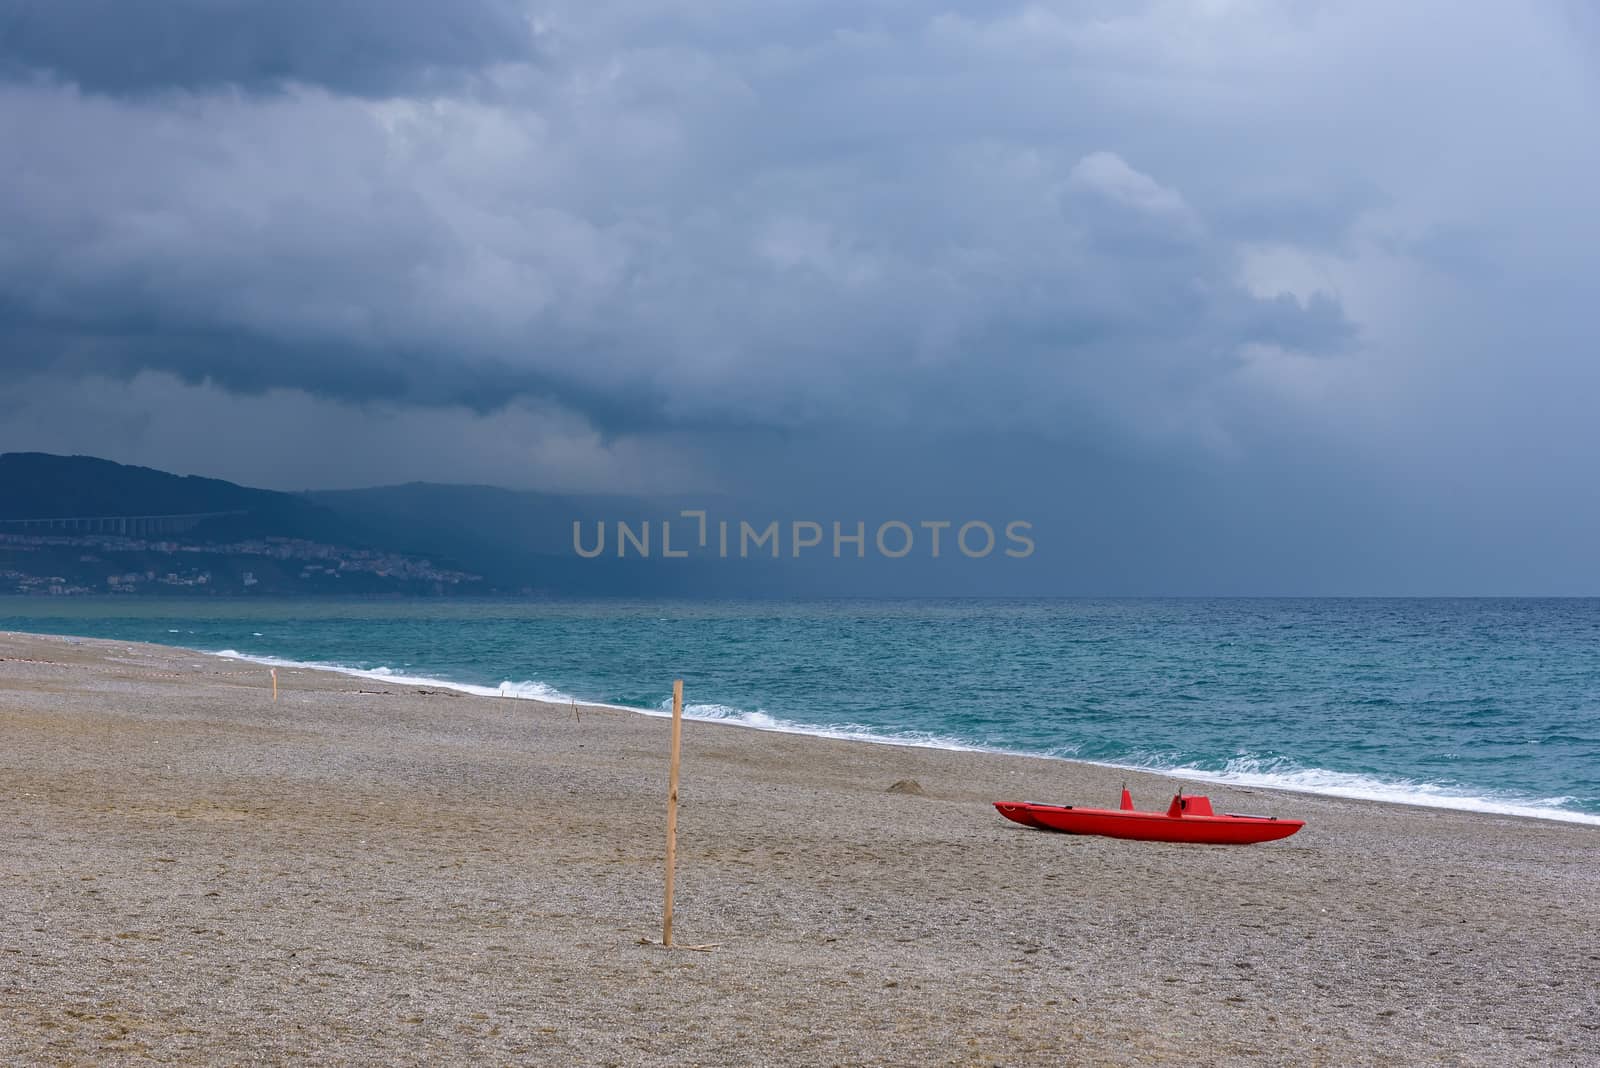 Dark clouds over the calabrian beach before the storm